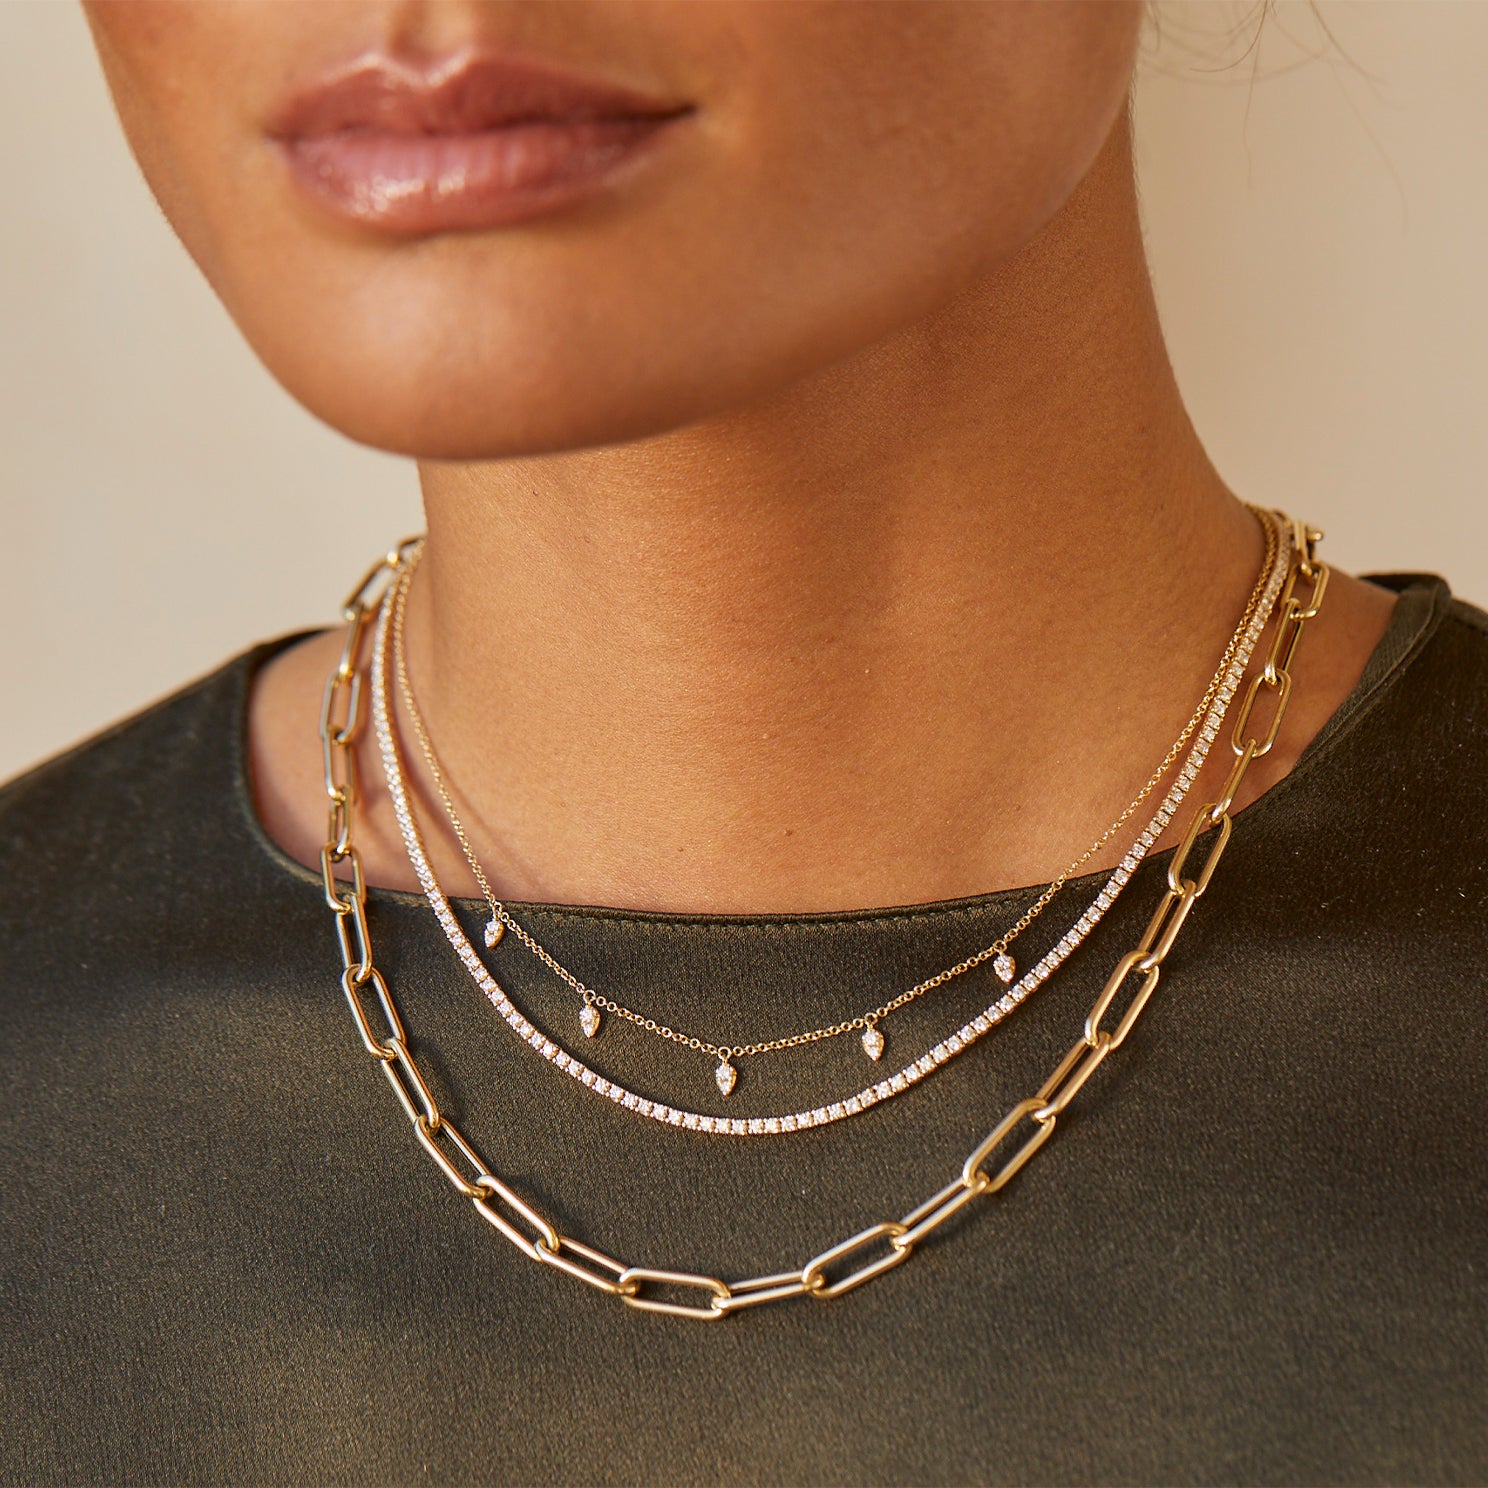 Diamond Grace Necklace styled on neck of model with layered necklaces and model in black blouse